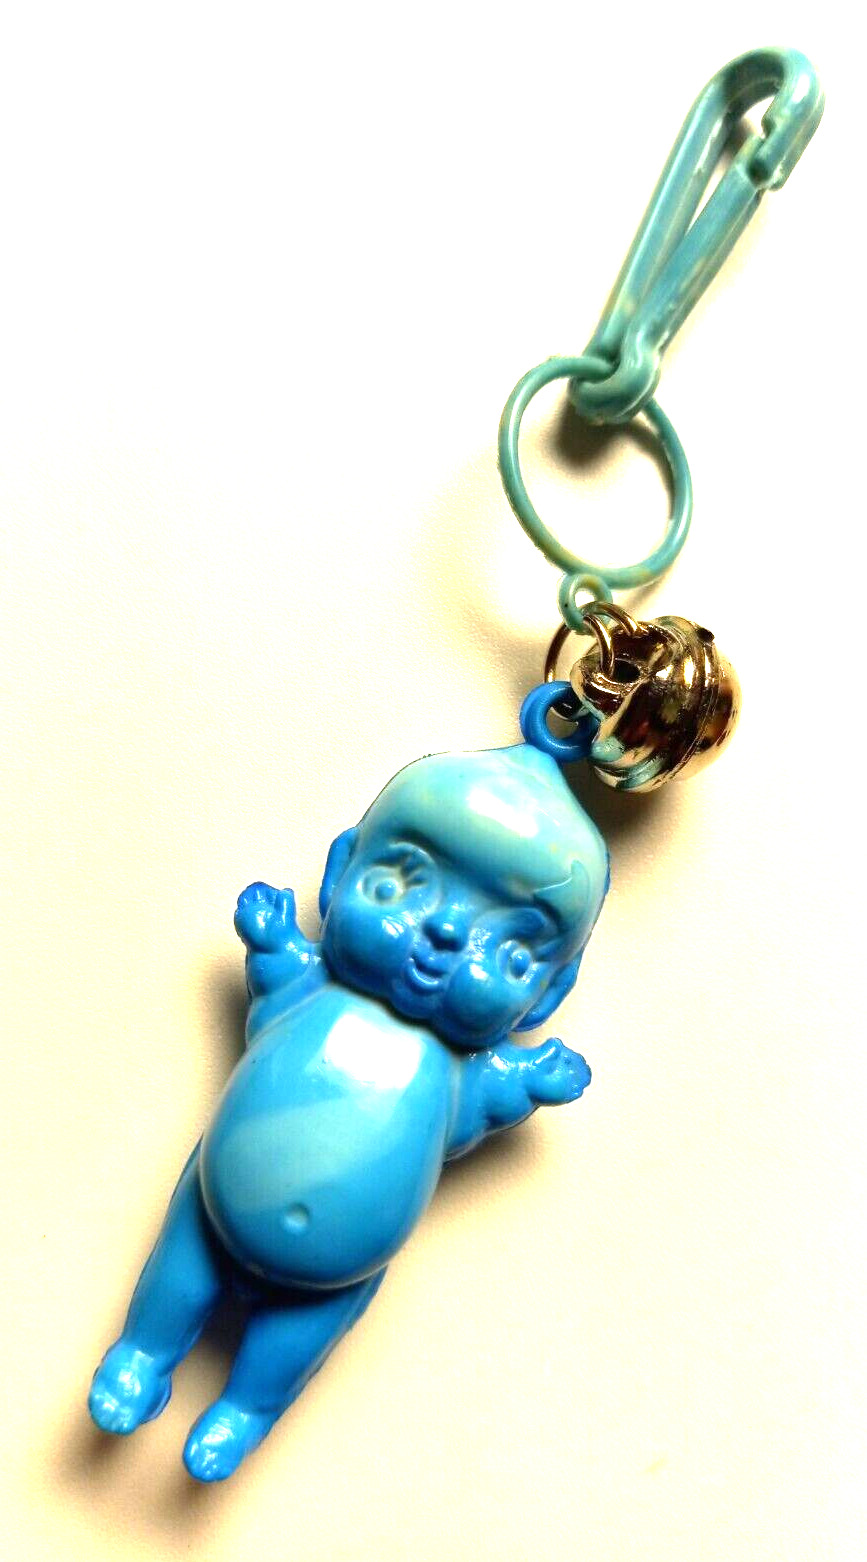 Charm 1980s Vintage Plastic Clip On Blue Baby Boy Kewpie for 80s Charms Necklace